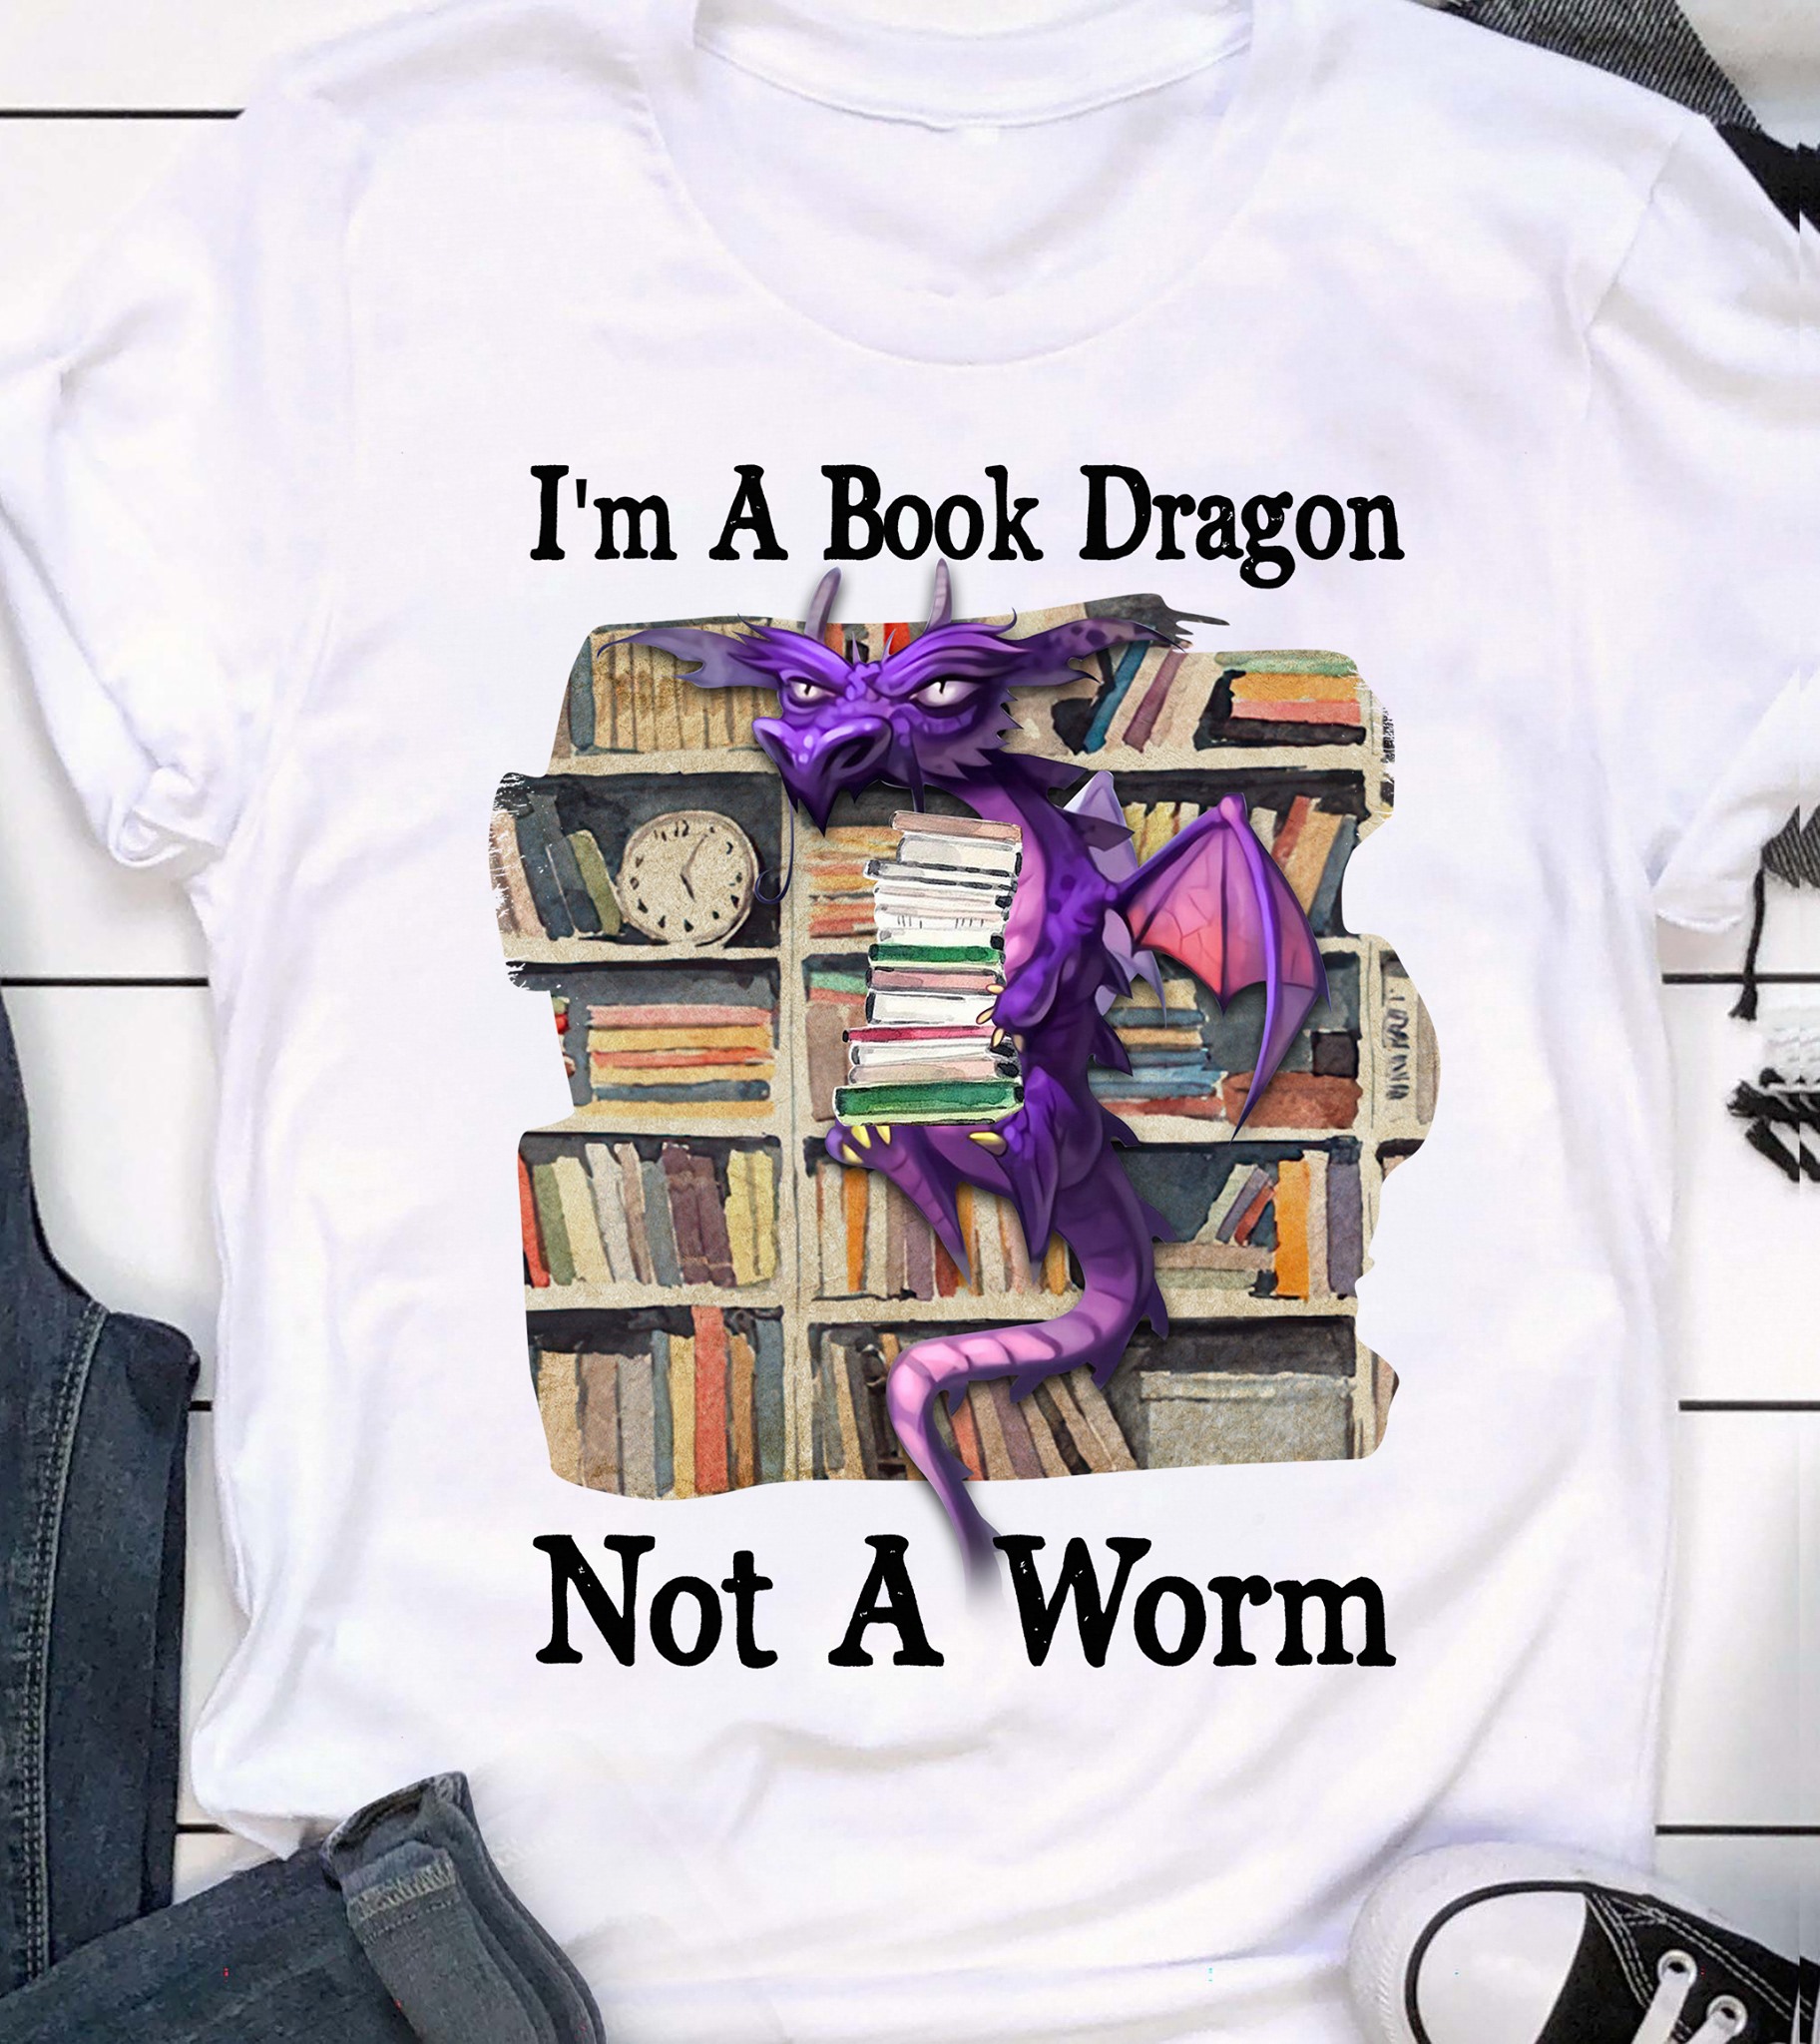 I'm a book dragon not a worm - Book and dragon